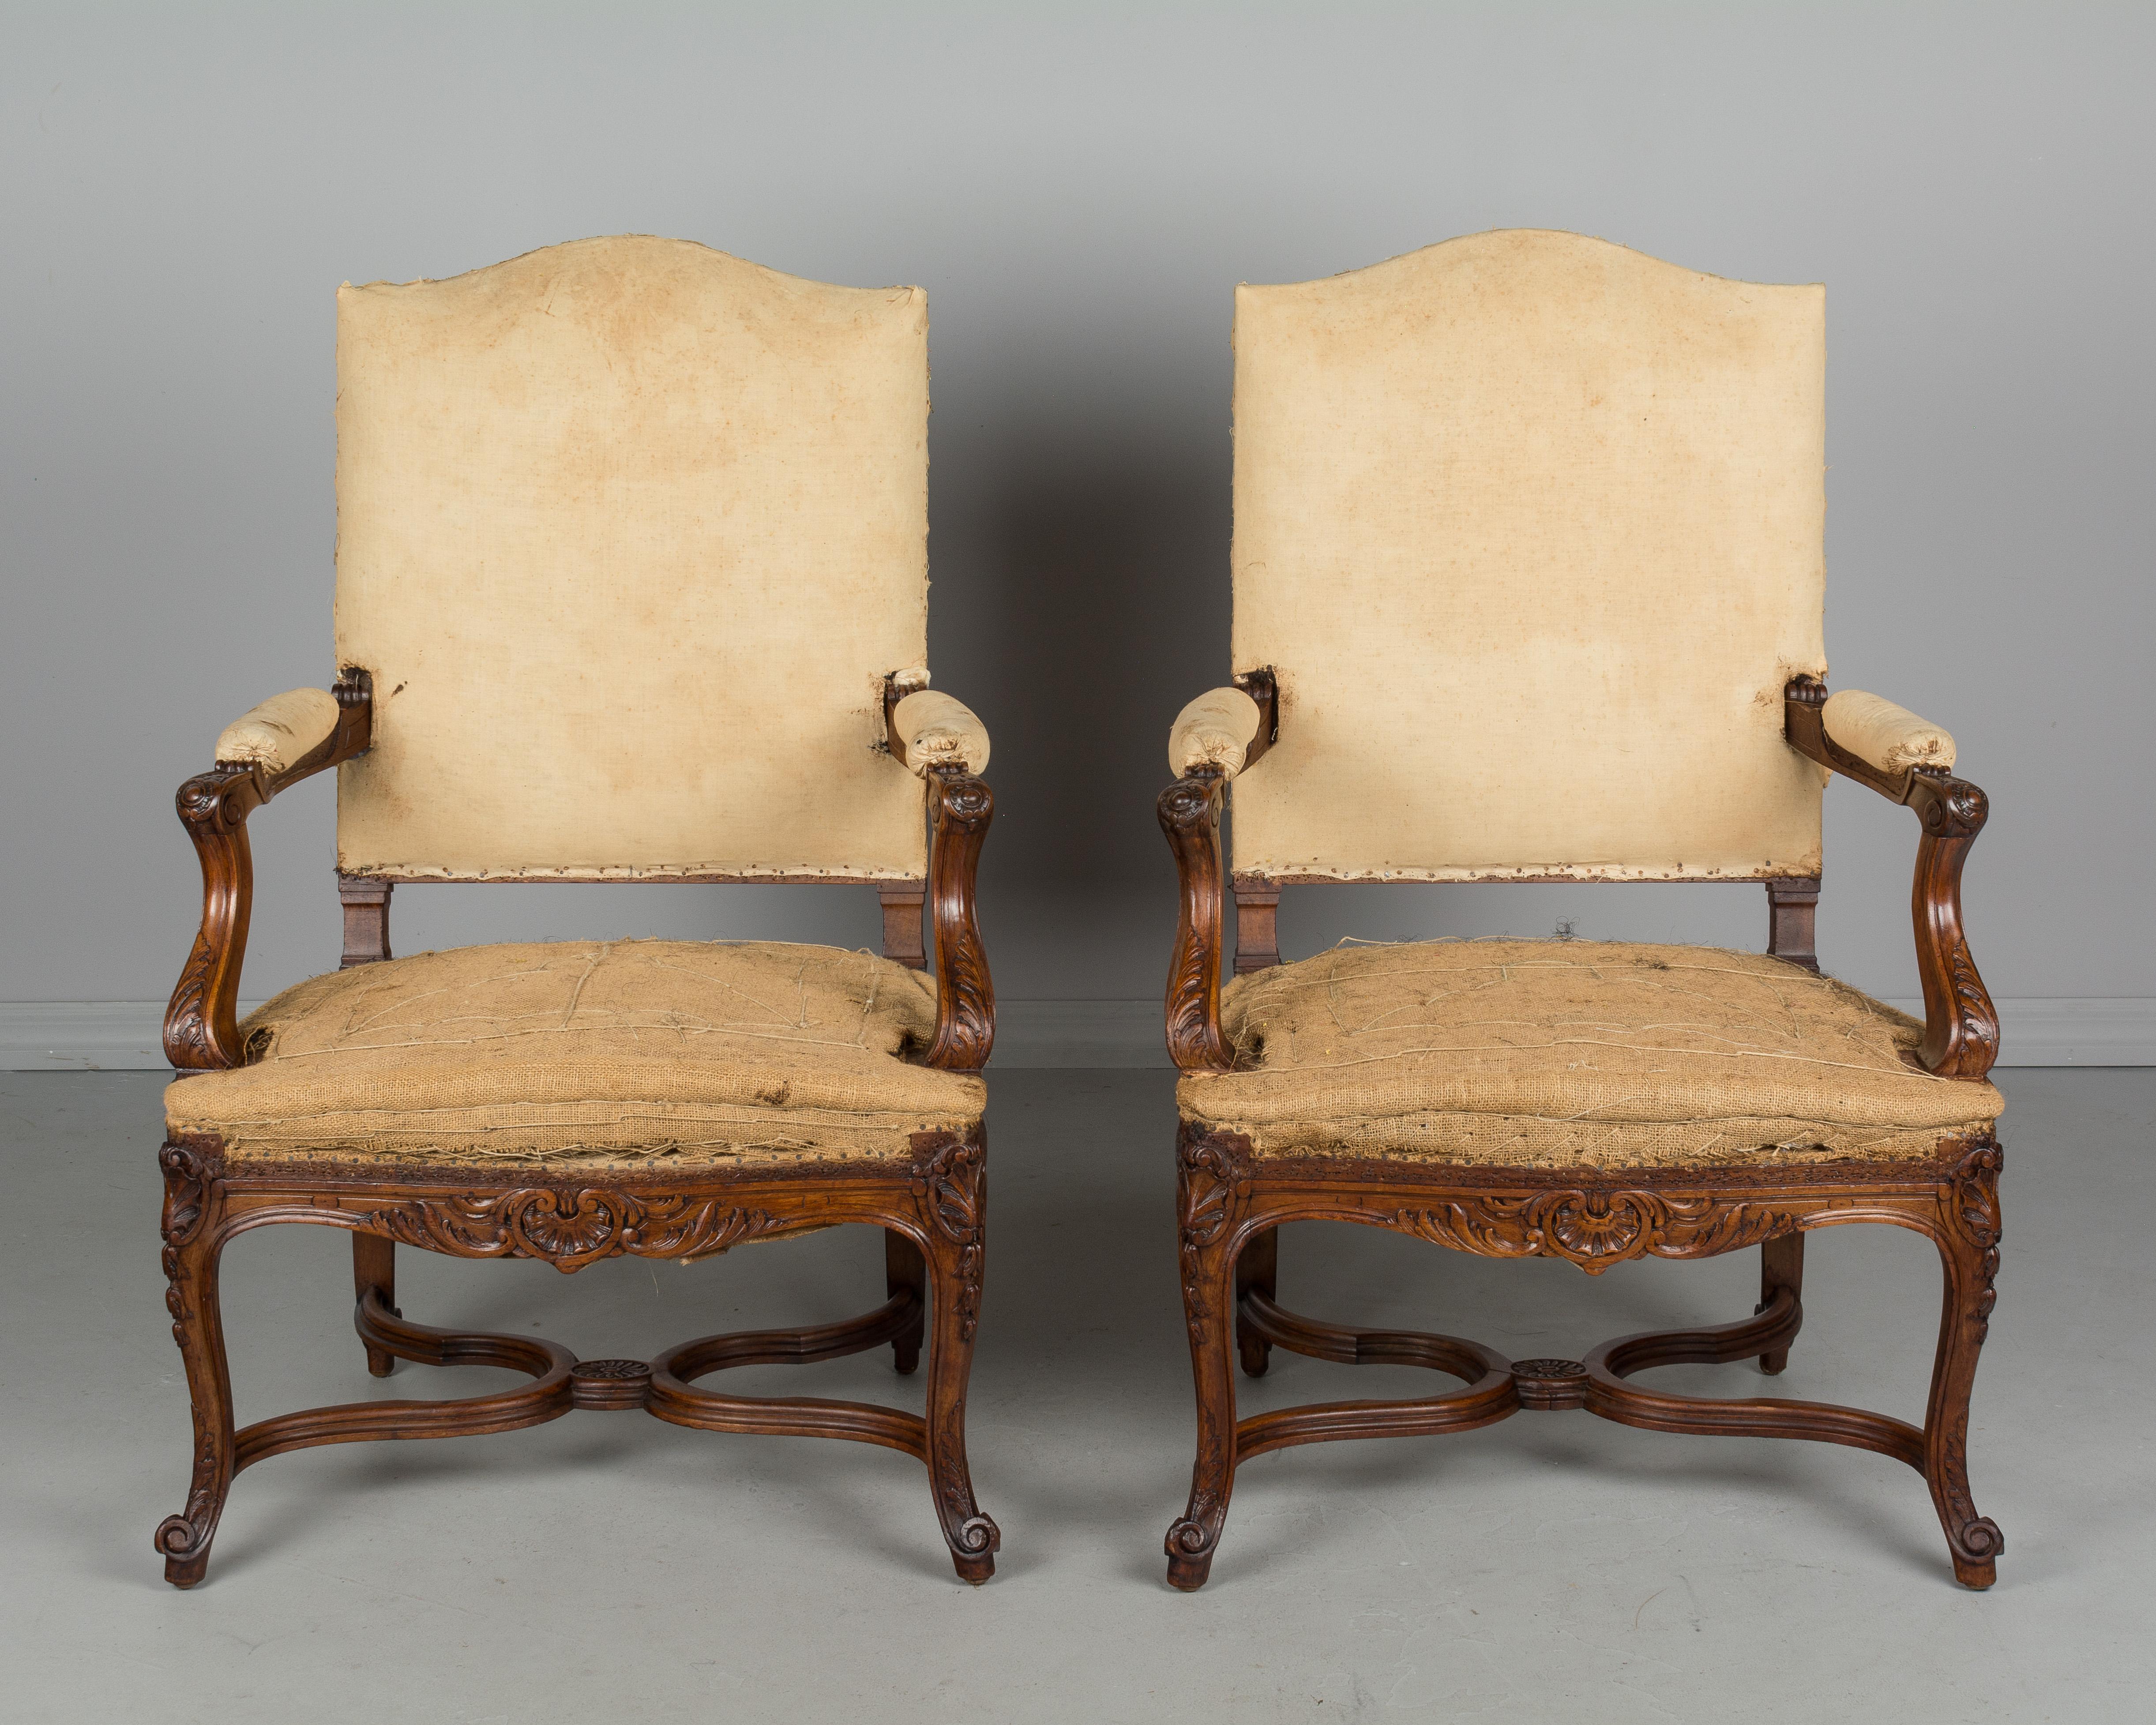 Pair of French Regence style fauteuils, or arm chairs. Hand-carved walnut frames with X-stretcher. Sturdy with comfortable proportions. Stripped of old fabric and sold as is. Another pair is available. Check our listings. Please refer to photos for